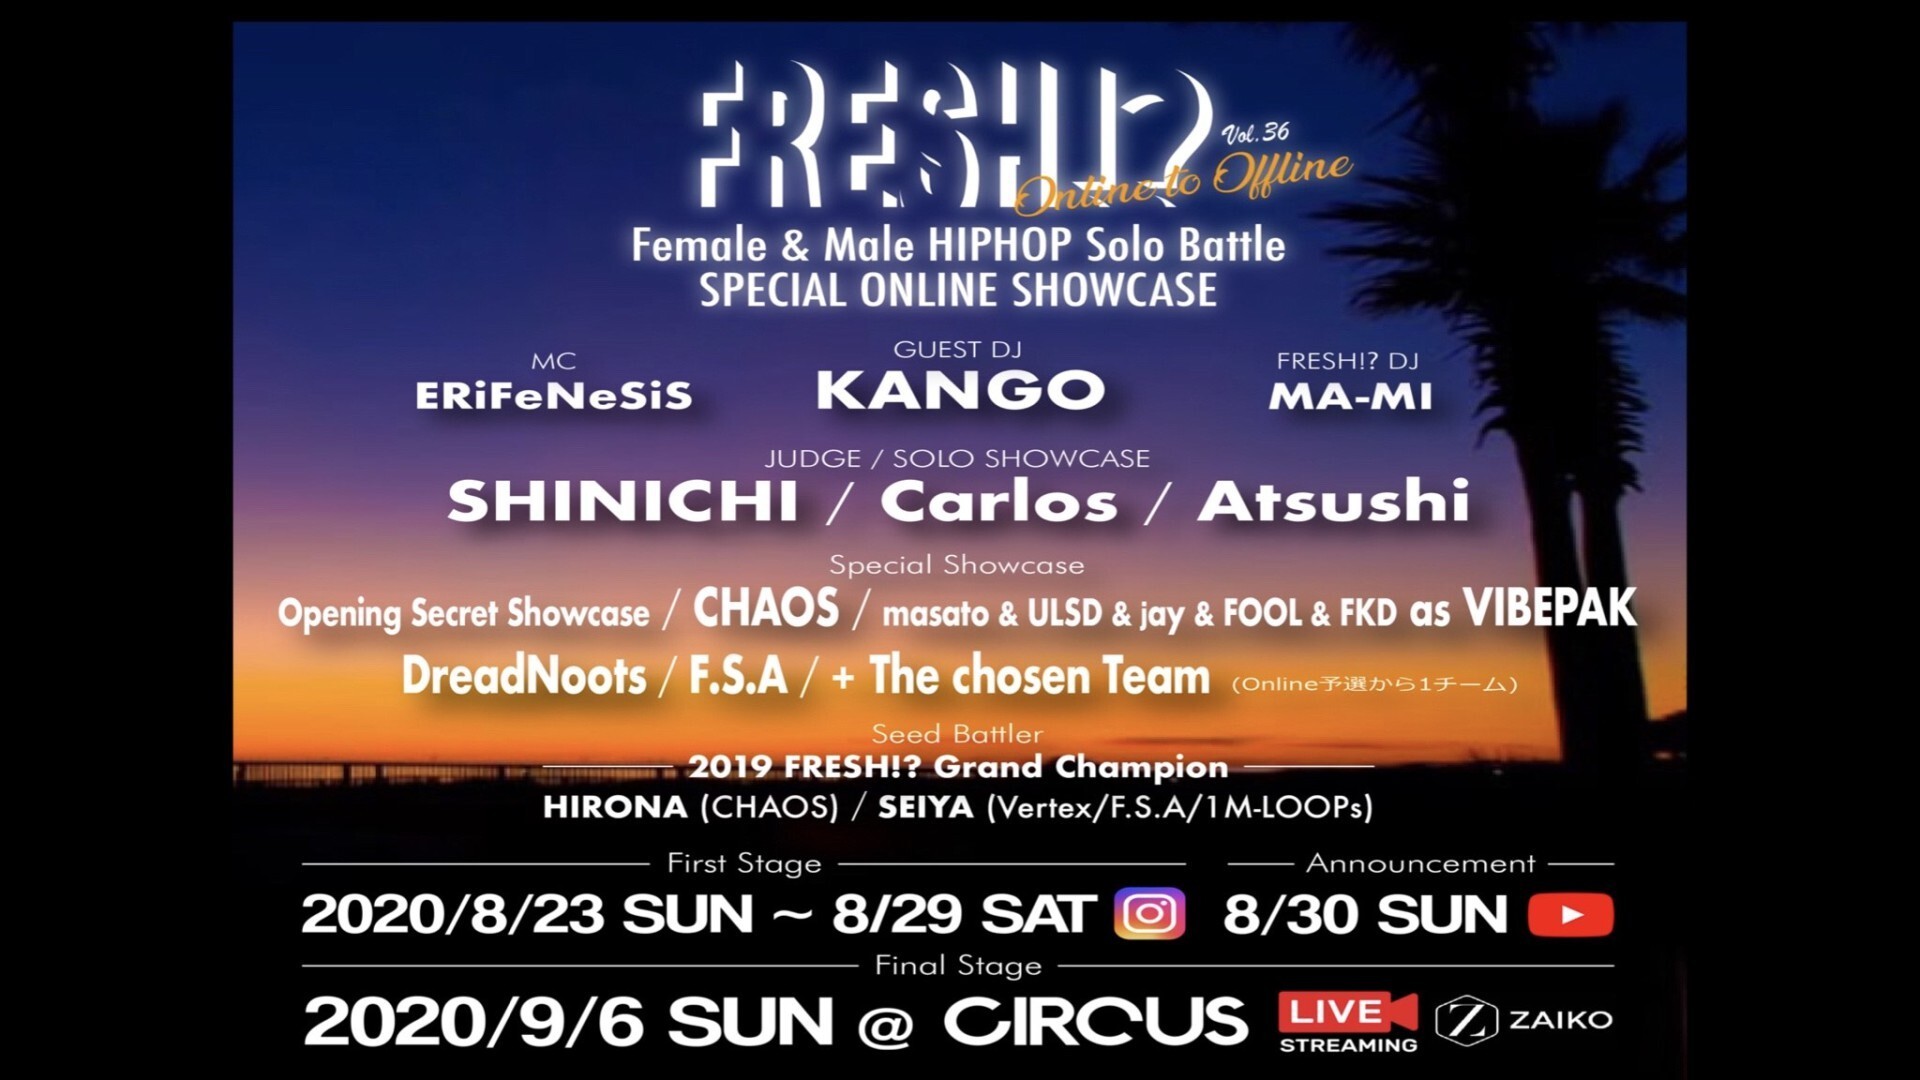 Iflyer Fresh Vol 36 Female Male Hiphop Solo Battle Special Online Showcase At Zaiko Live Streaming